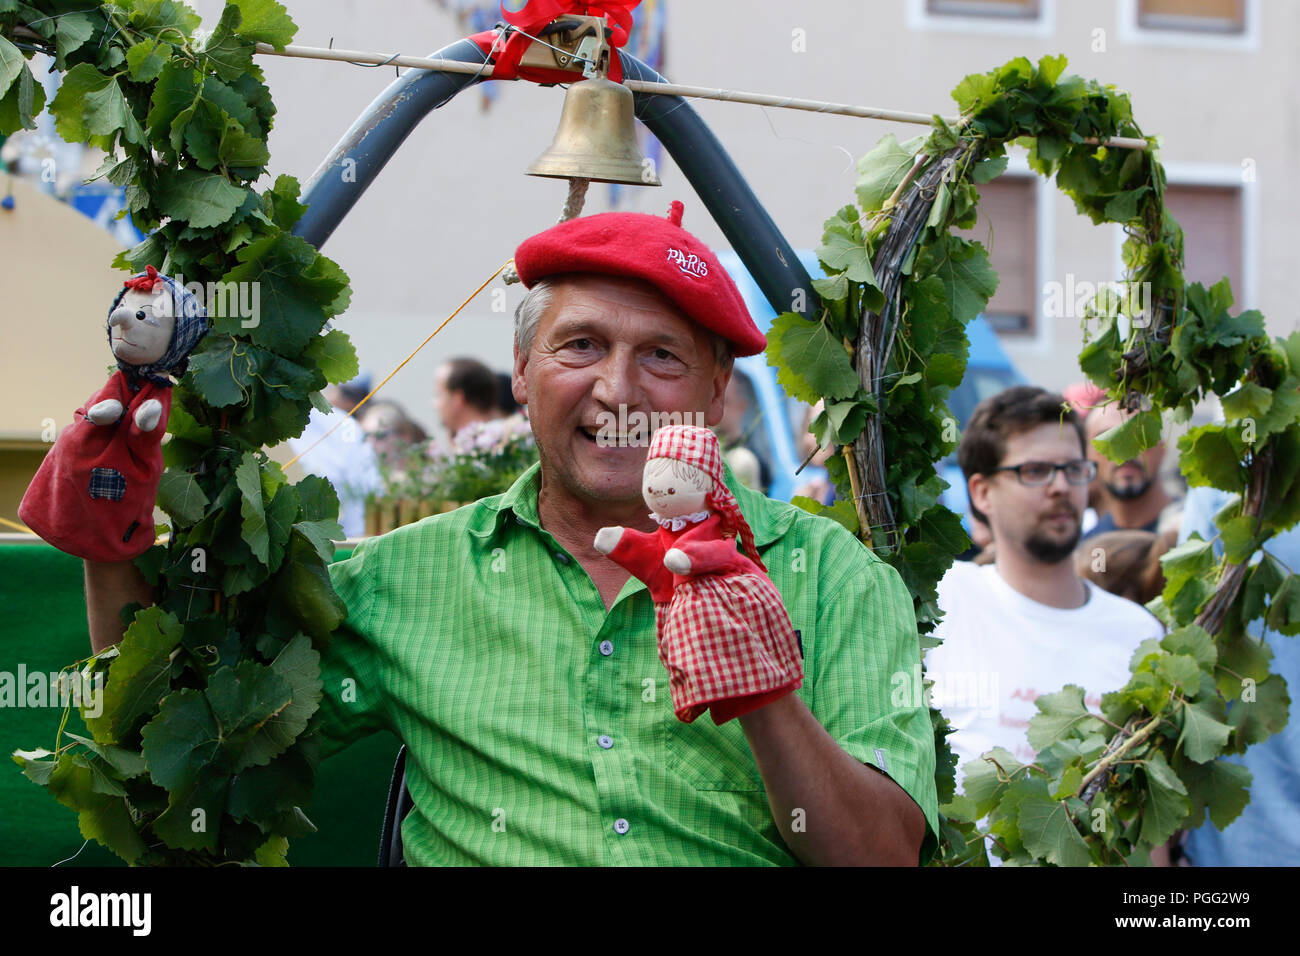 Worms, Germany. 26th August 2018. A participant in the parade uses two hand puppets. The first highlight of the 2018 Backfischfest was the big parade through the city of Worms with over 70 groups and floats. Community groups, music groups and businesses from Worms and further afield took part. Credit: Michael Debets/Alamy Live News Stock Photo